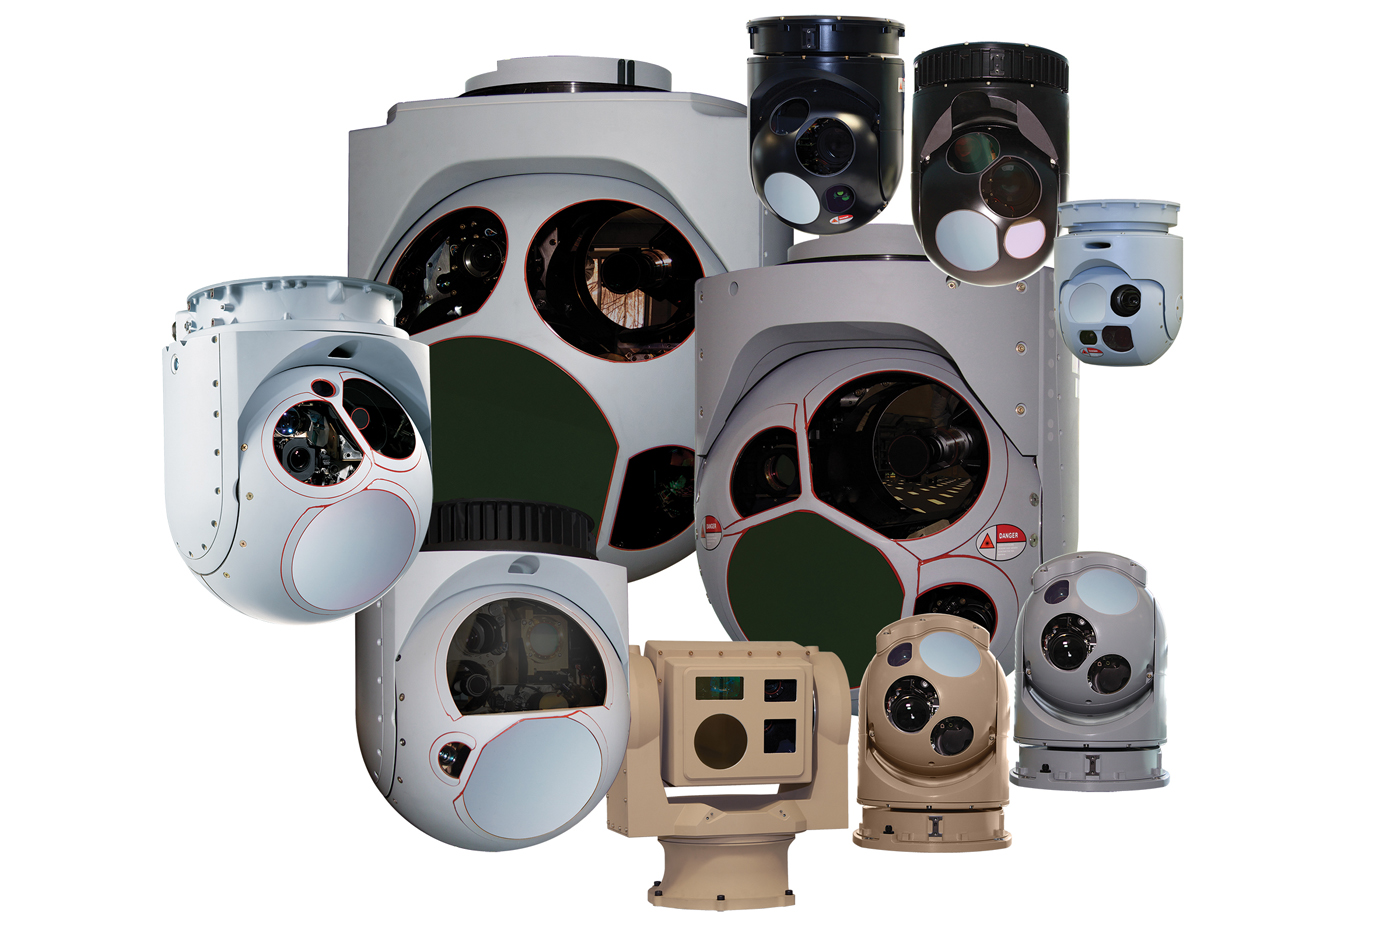 MX-Series electro-optical/infrared (EO/IR) products run from the small and tactical MX-10 through L3’s largest and most powerful MX product, the MX-25. L3 Wescam Image